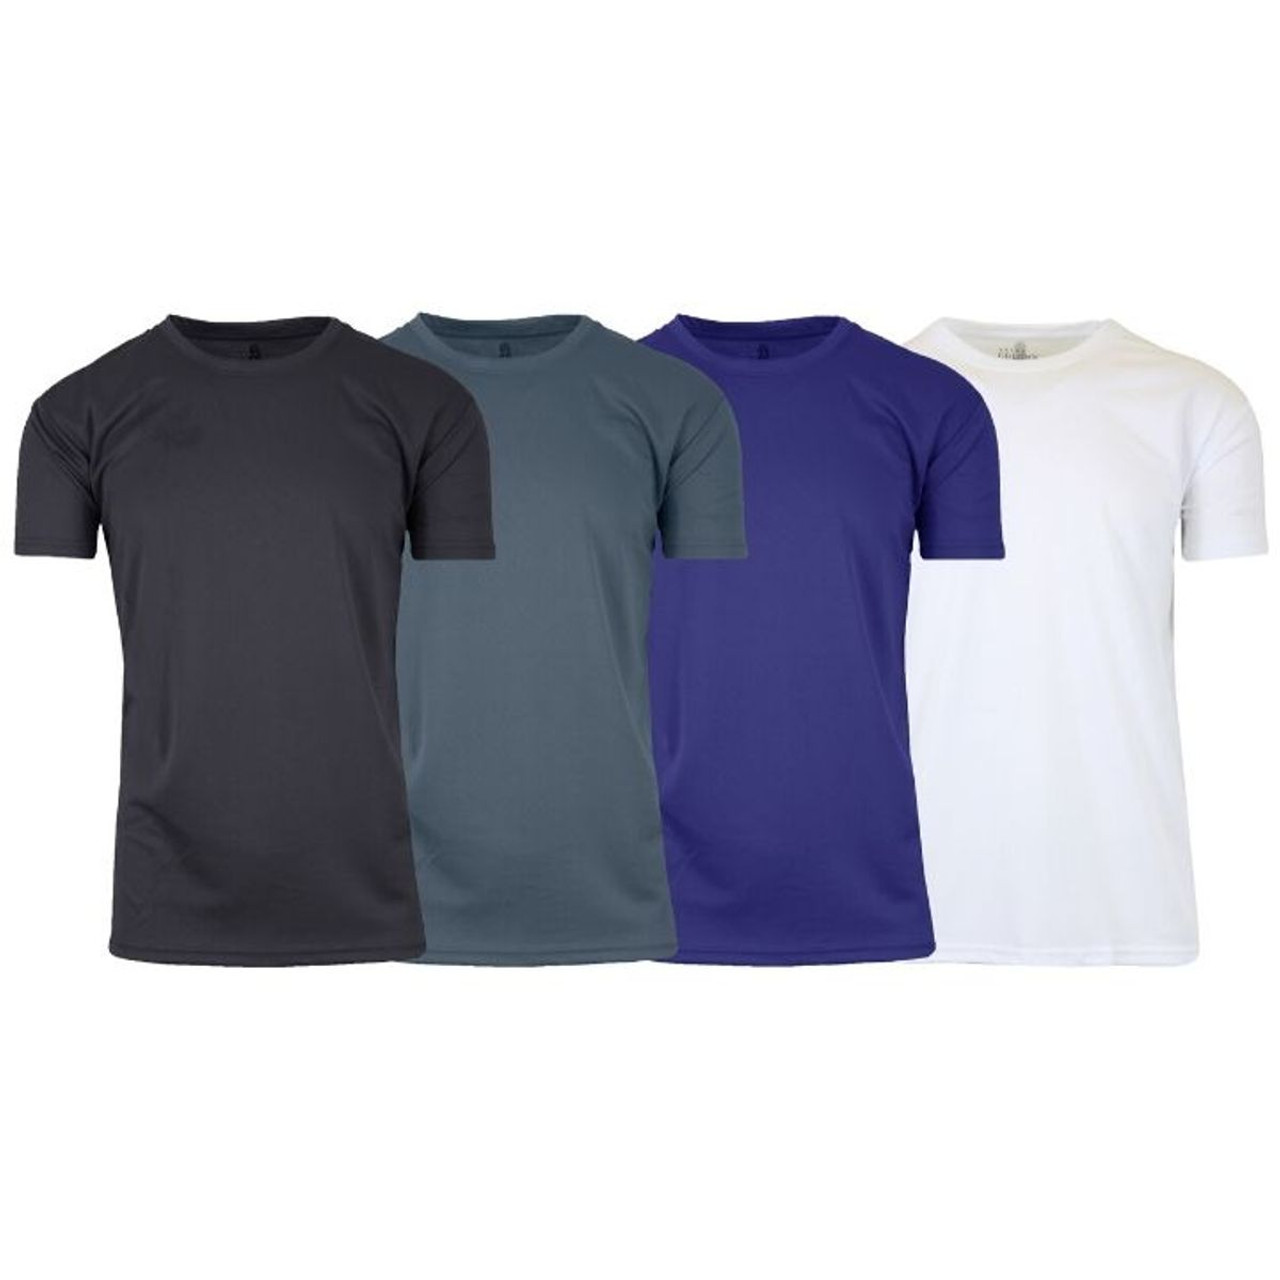 Men's Moisture-Wicking Wrinkle-Free Performance Tee (3-, 4- or 5-Pack) product image